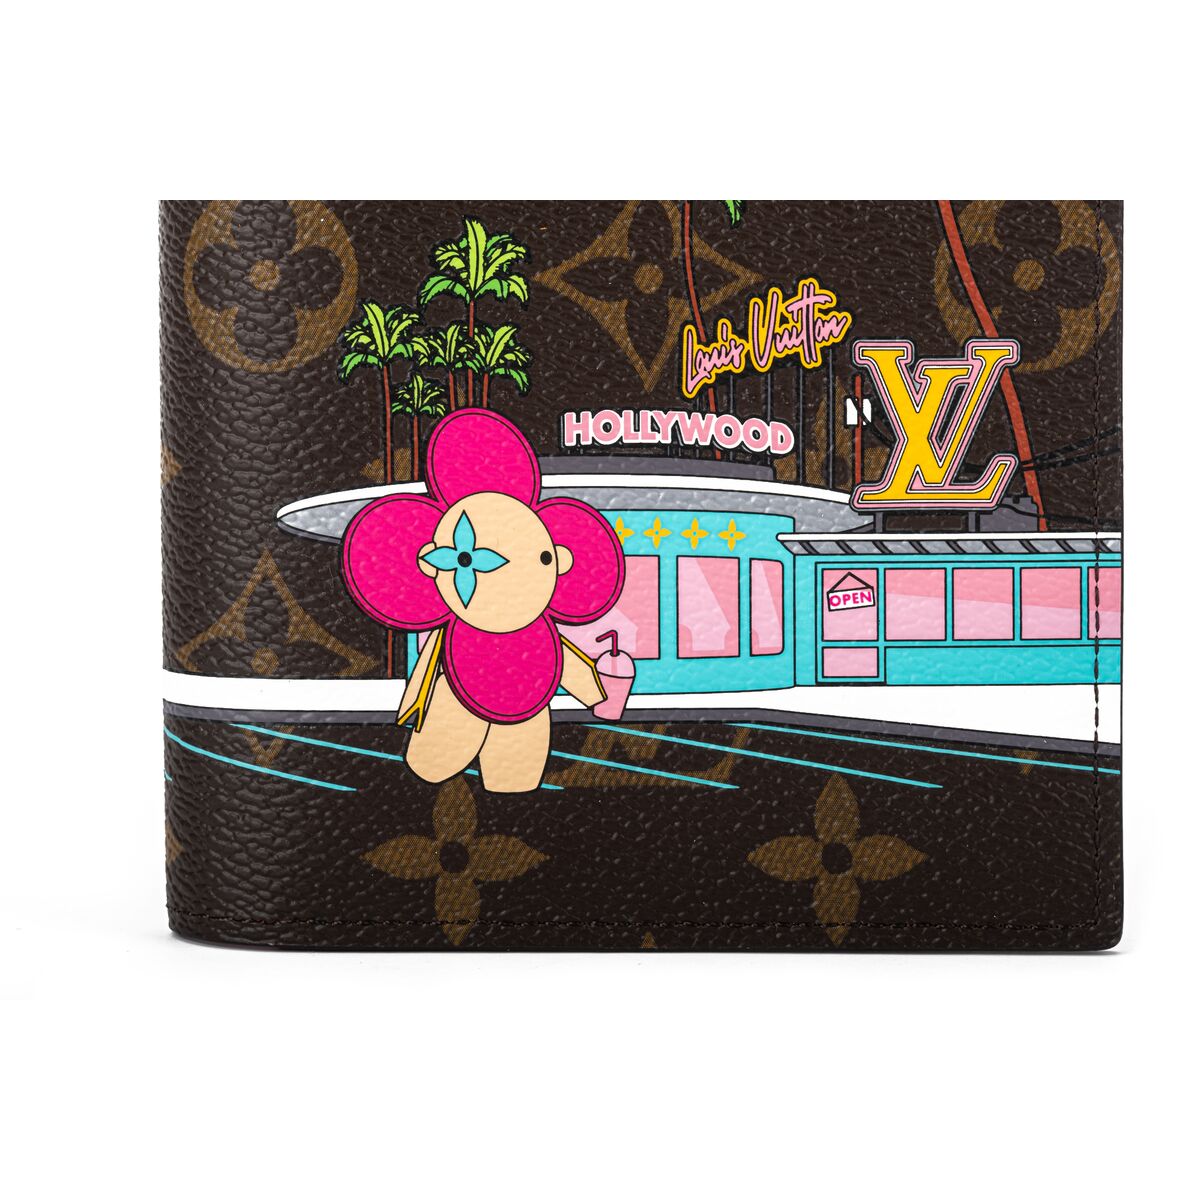 Louis Vuitton Wallet & Passport Cover Holder Vivienne Holiday Edition  Limited